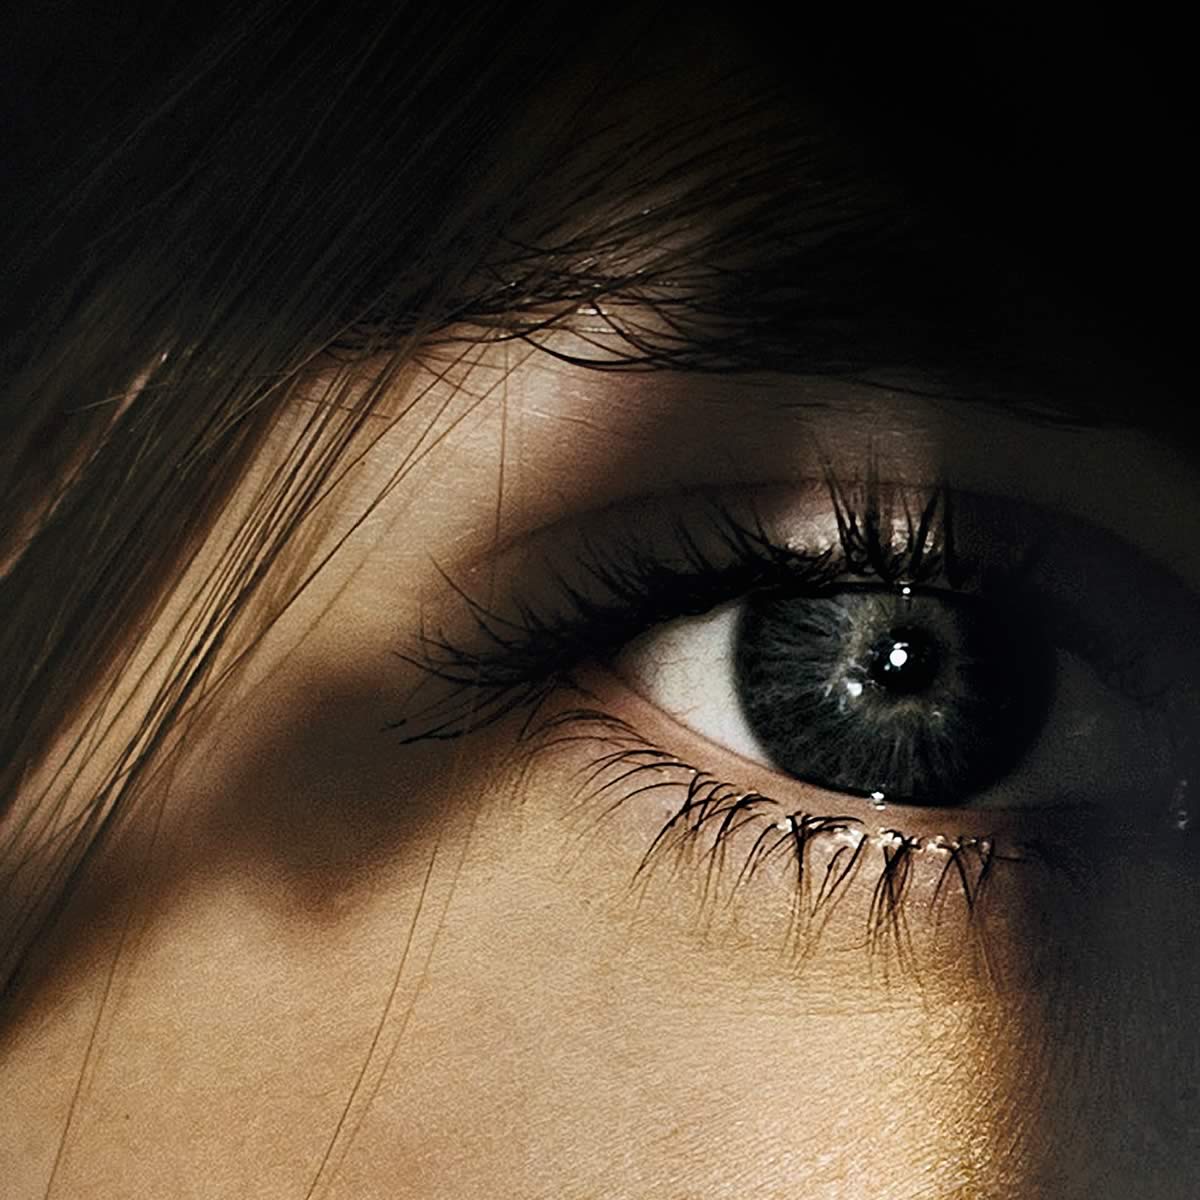 Close up photo of a woman’s eye (from the cover of His Crimes Her Secrets).